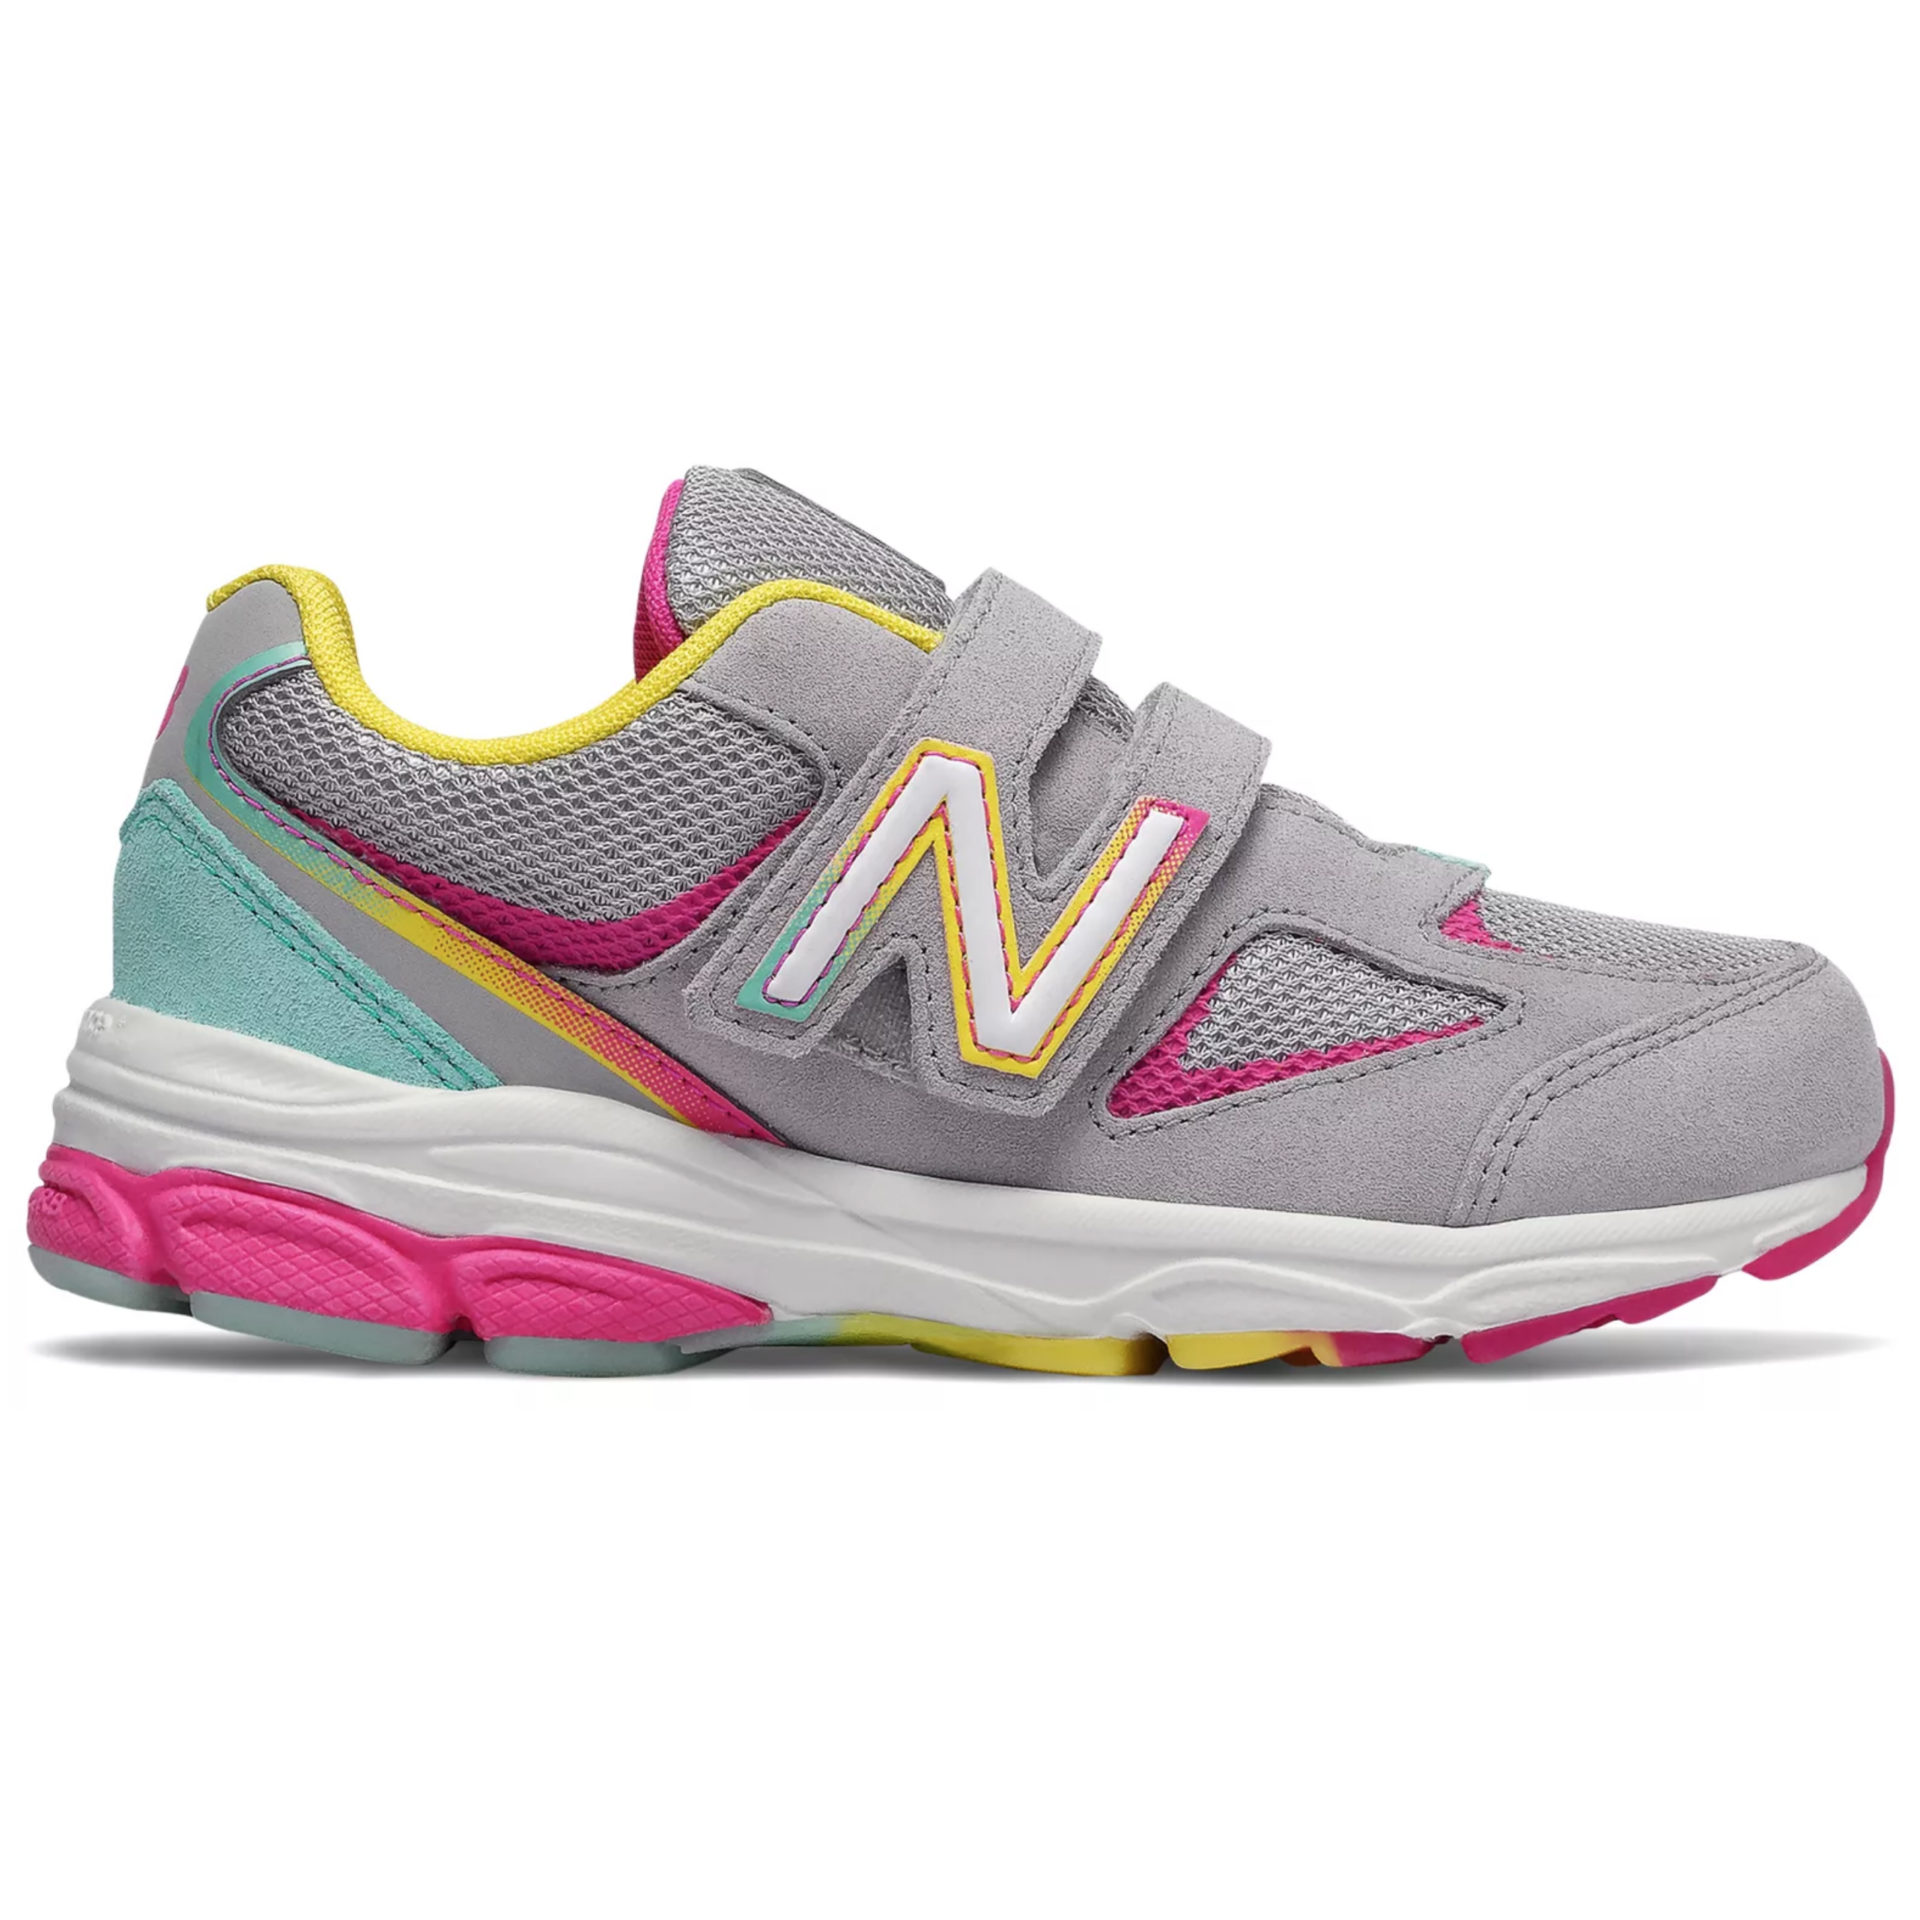 new balance tennis shoes with velcro straps